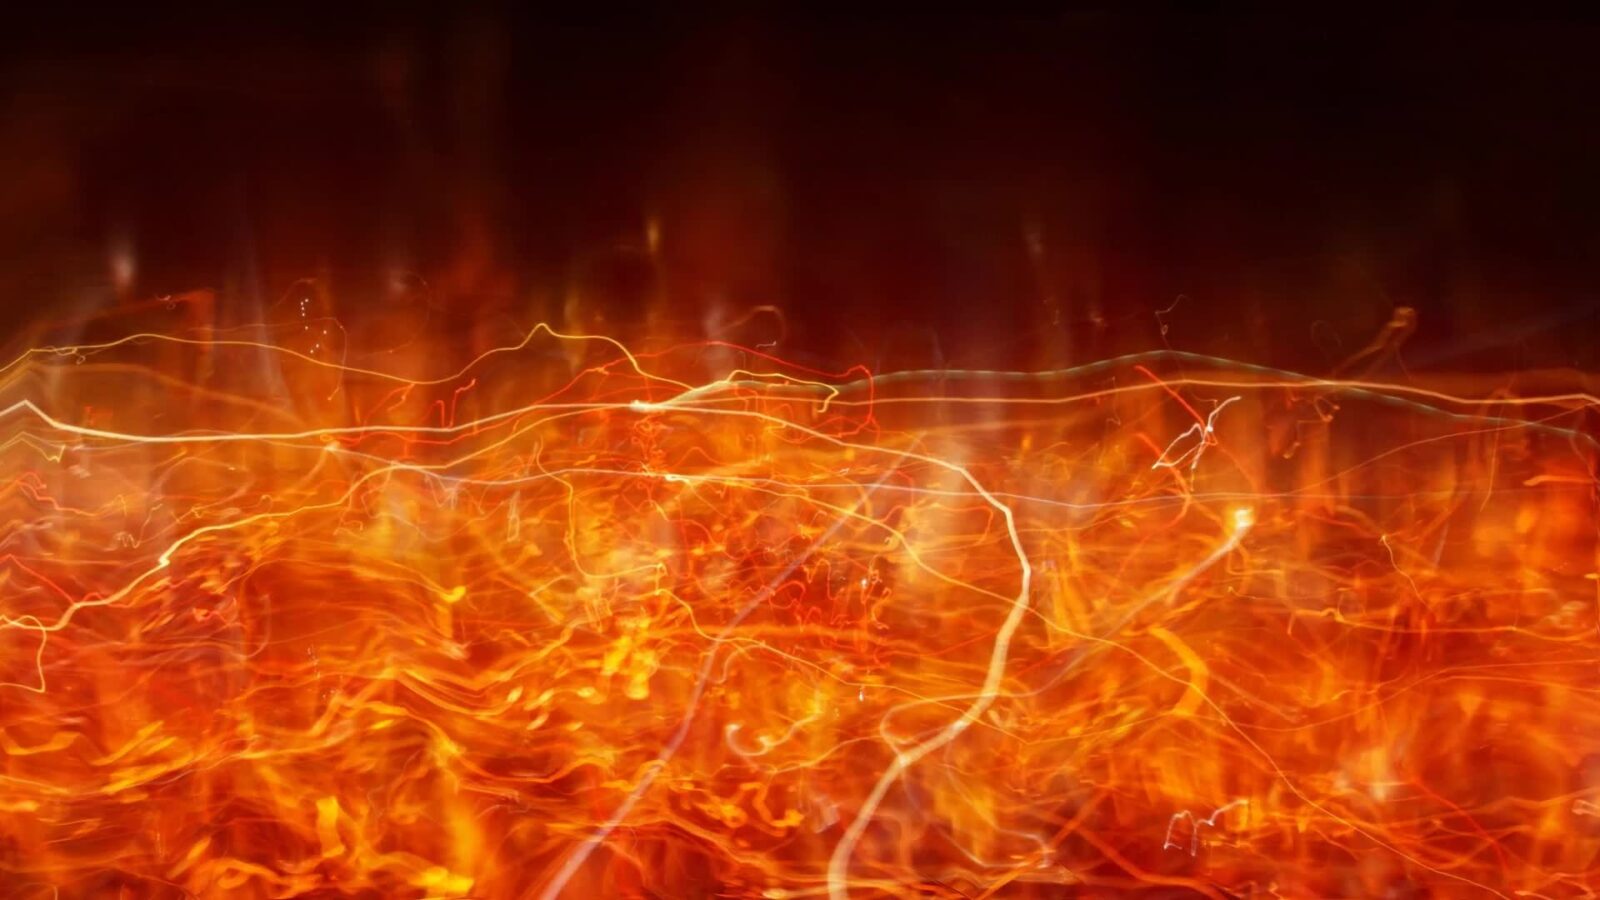 LiveWallpapers4Free.com | Fire Lava Abstract Shapes - Free Live Wallpaper